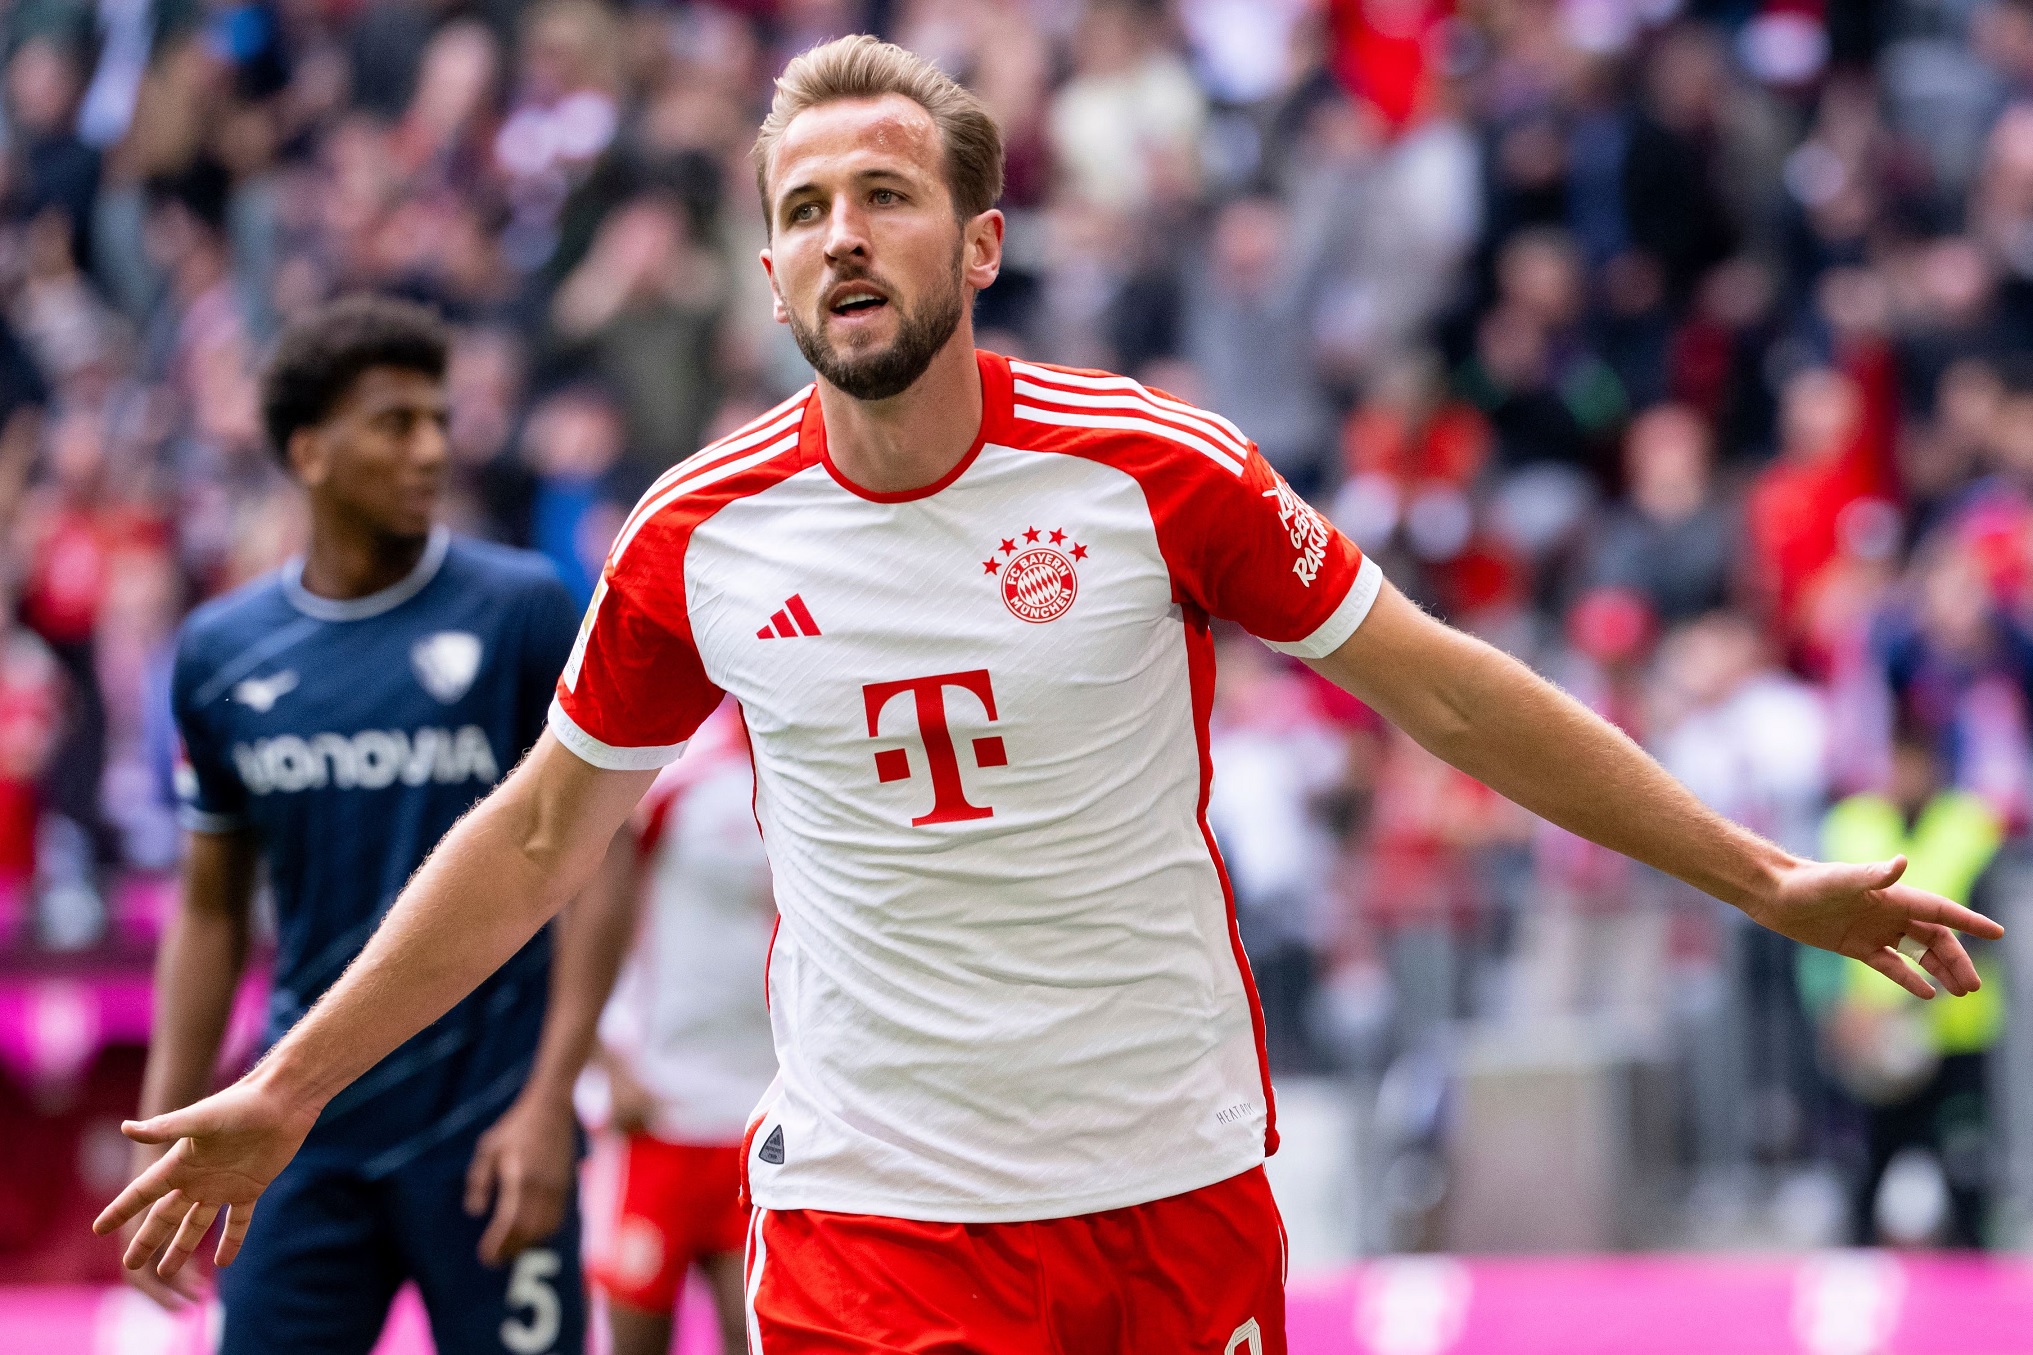 Harry Kane might well consider a move back to Tottenham if he doesn't win any titles at Bayern